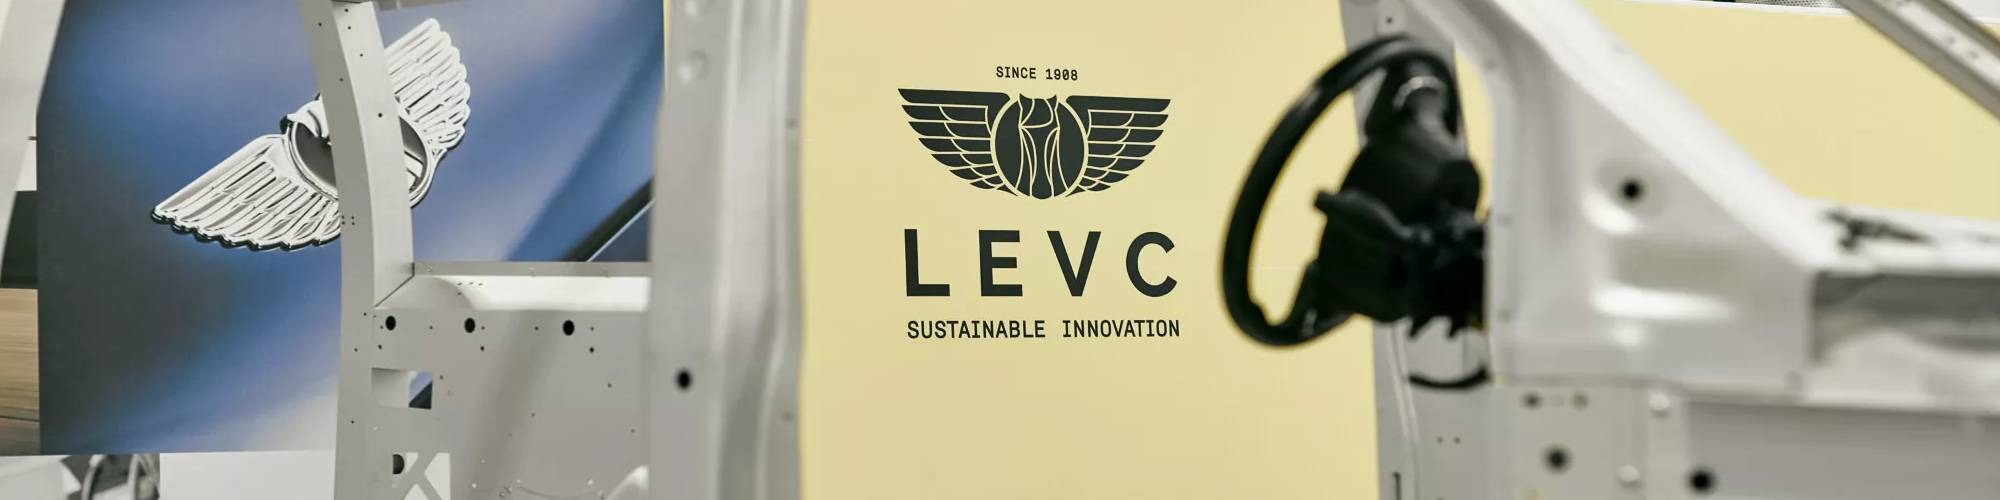 London Electric Vehicle Company (LEVC) Service and Repair